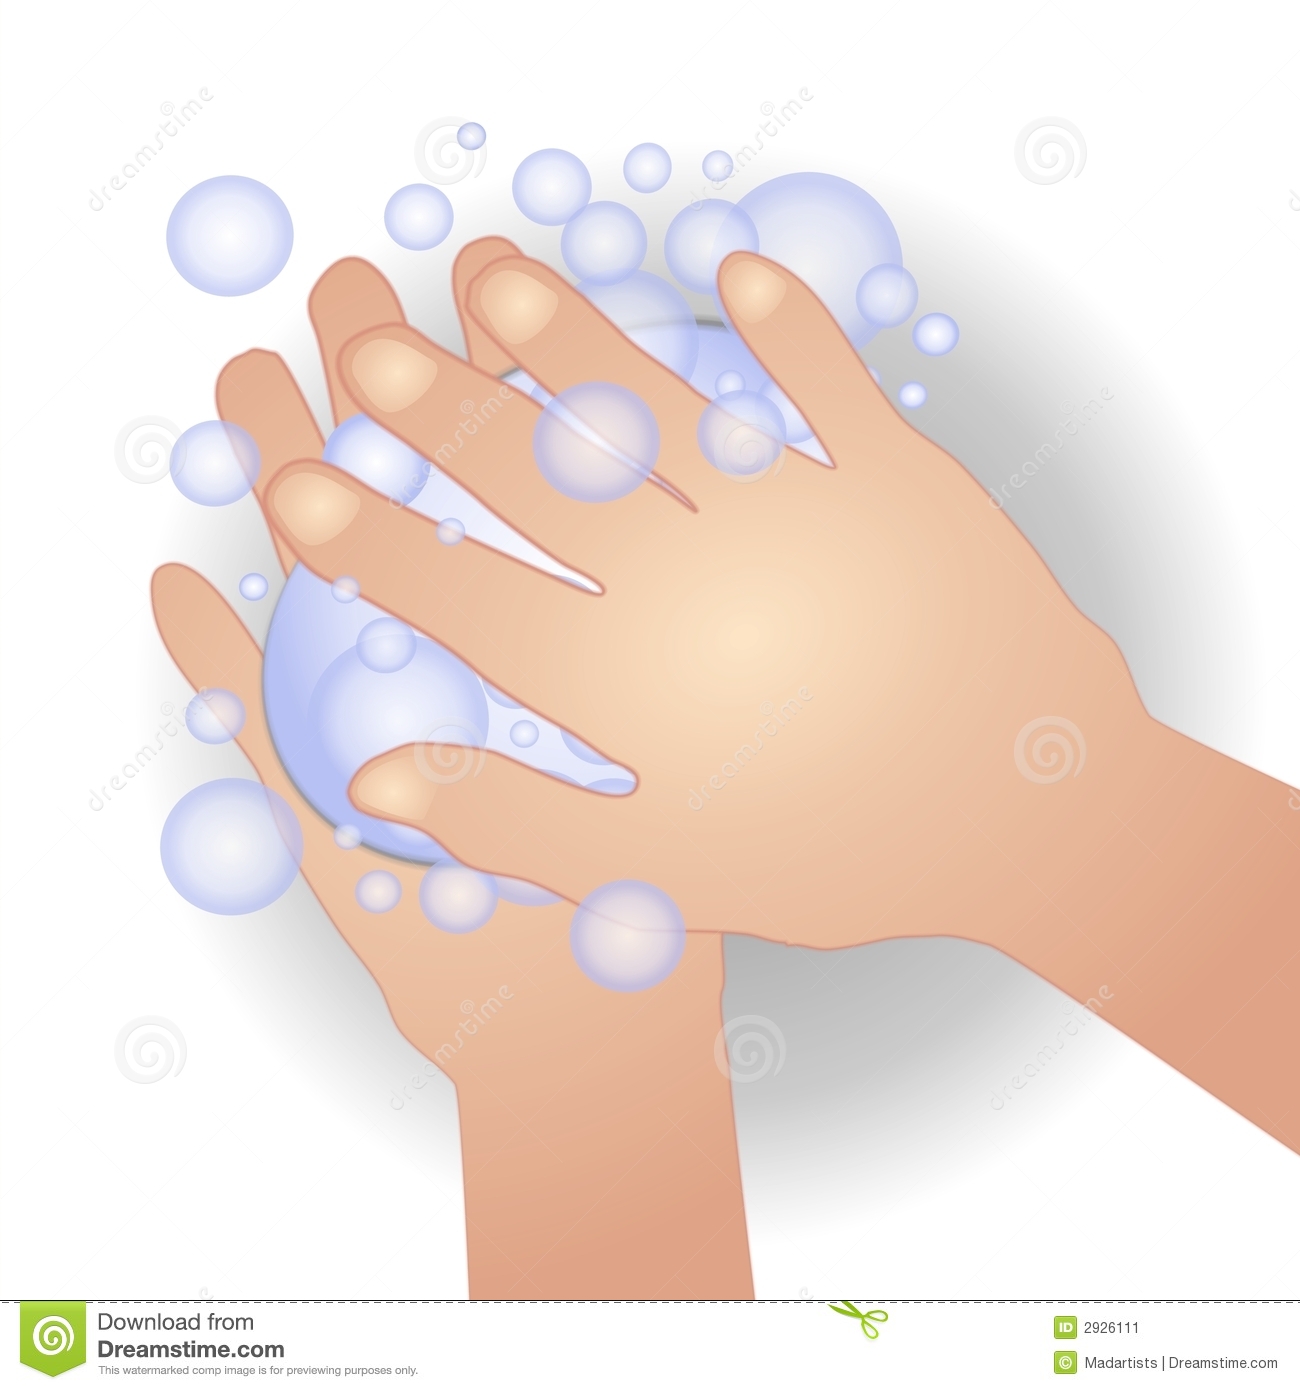 Clip Art Illustration Of Someone Washing Their Hands With Lots Of